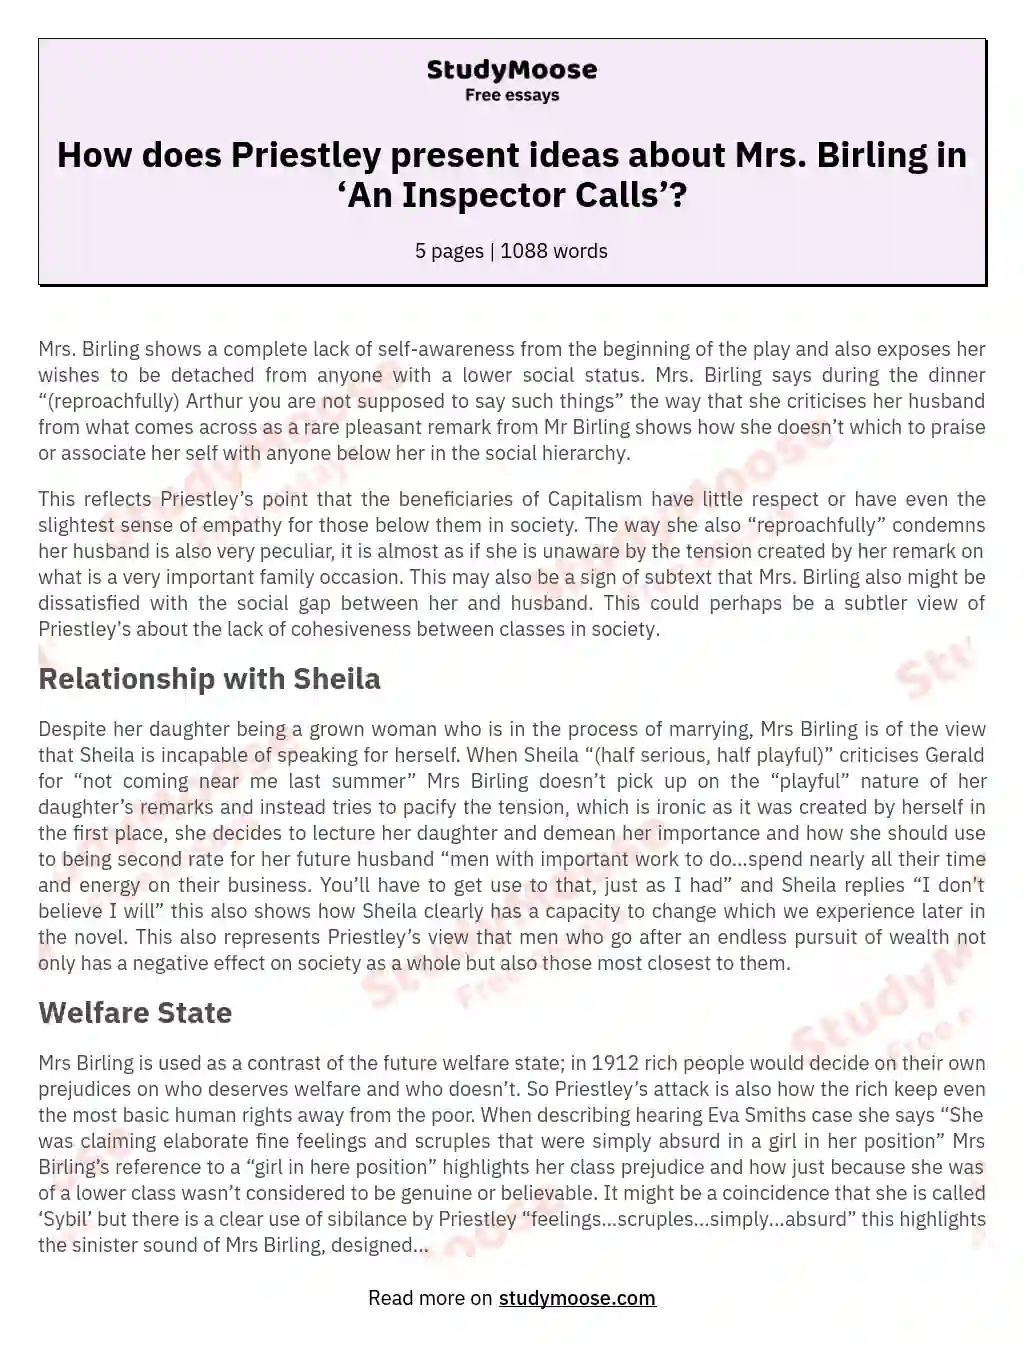 How does Priestley present ideas about Mrs. Birling in ‘An Inspector Calls’? essay